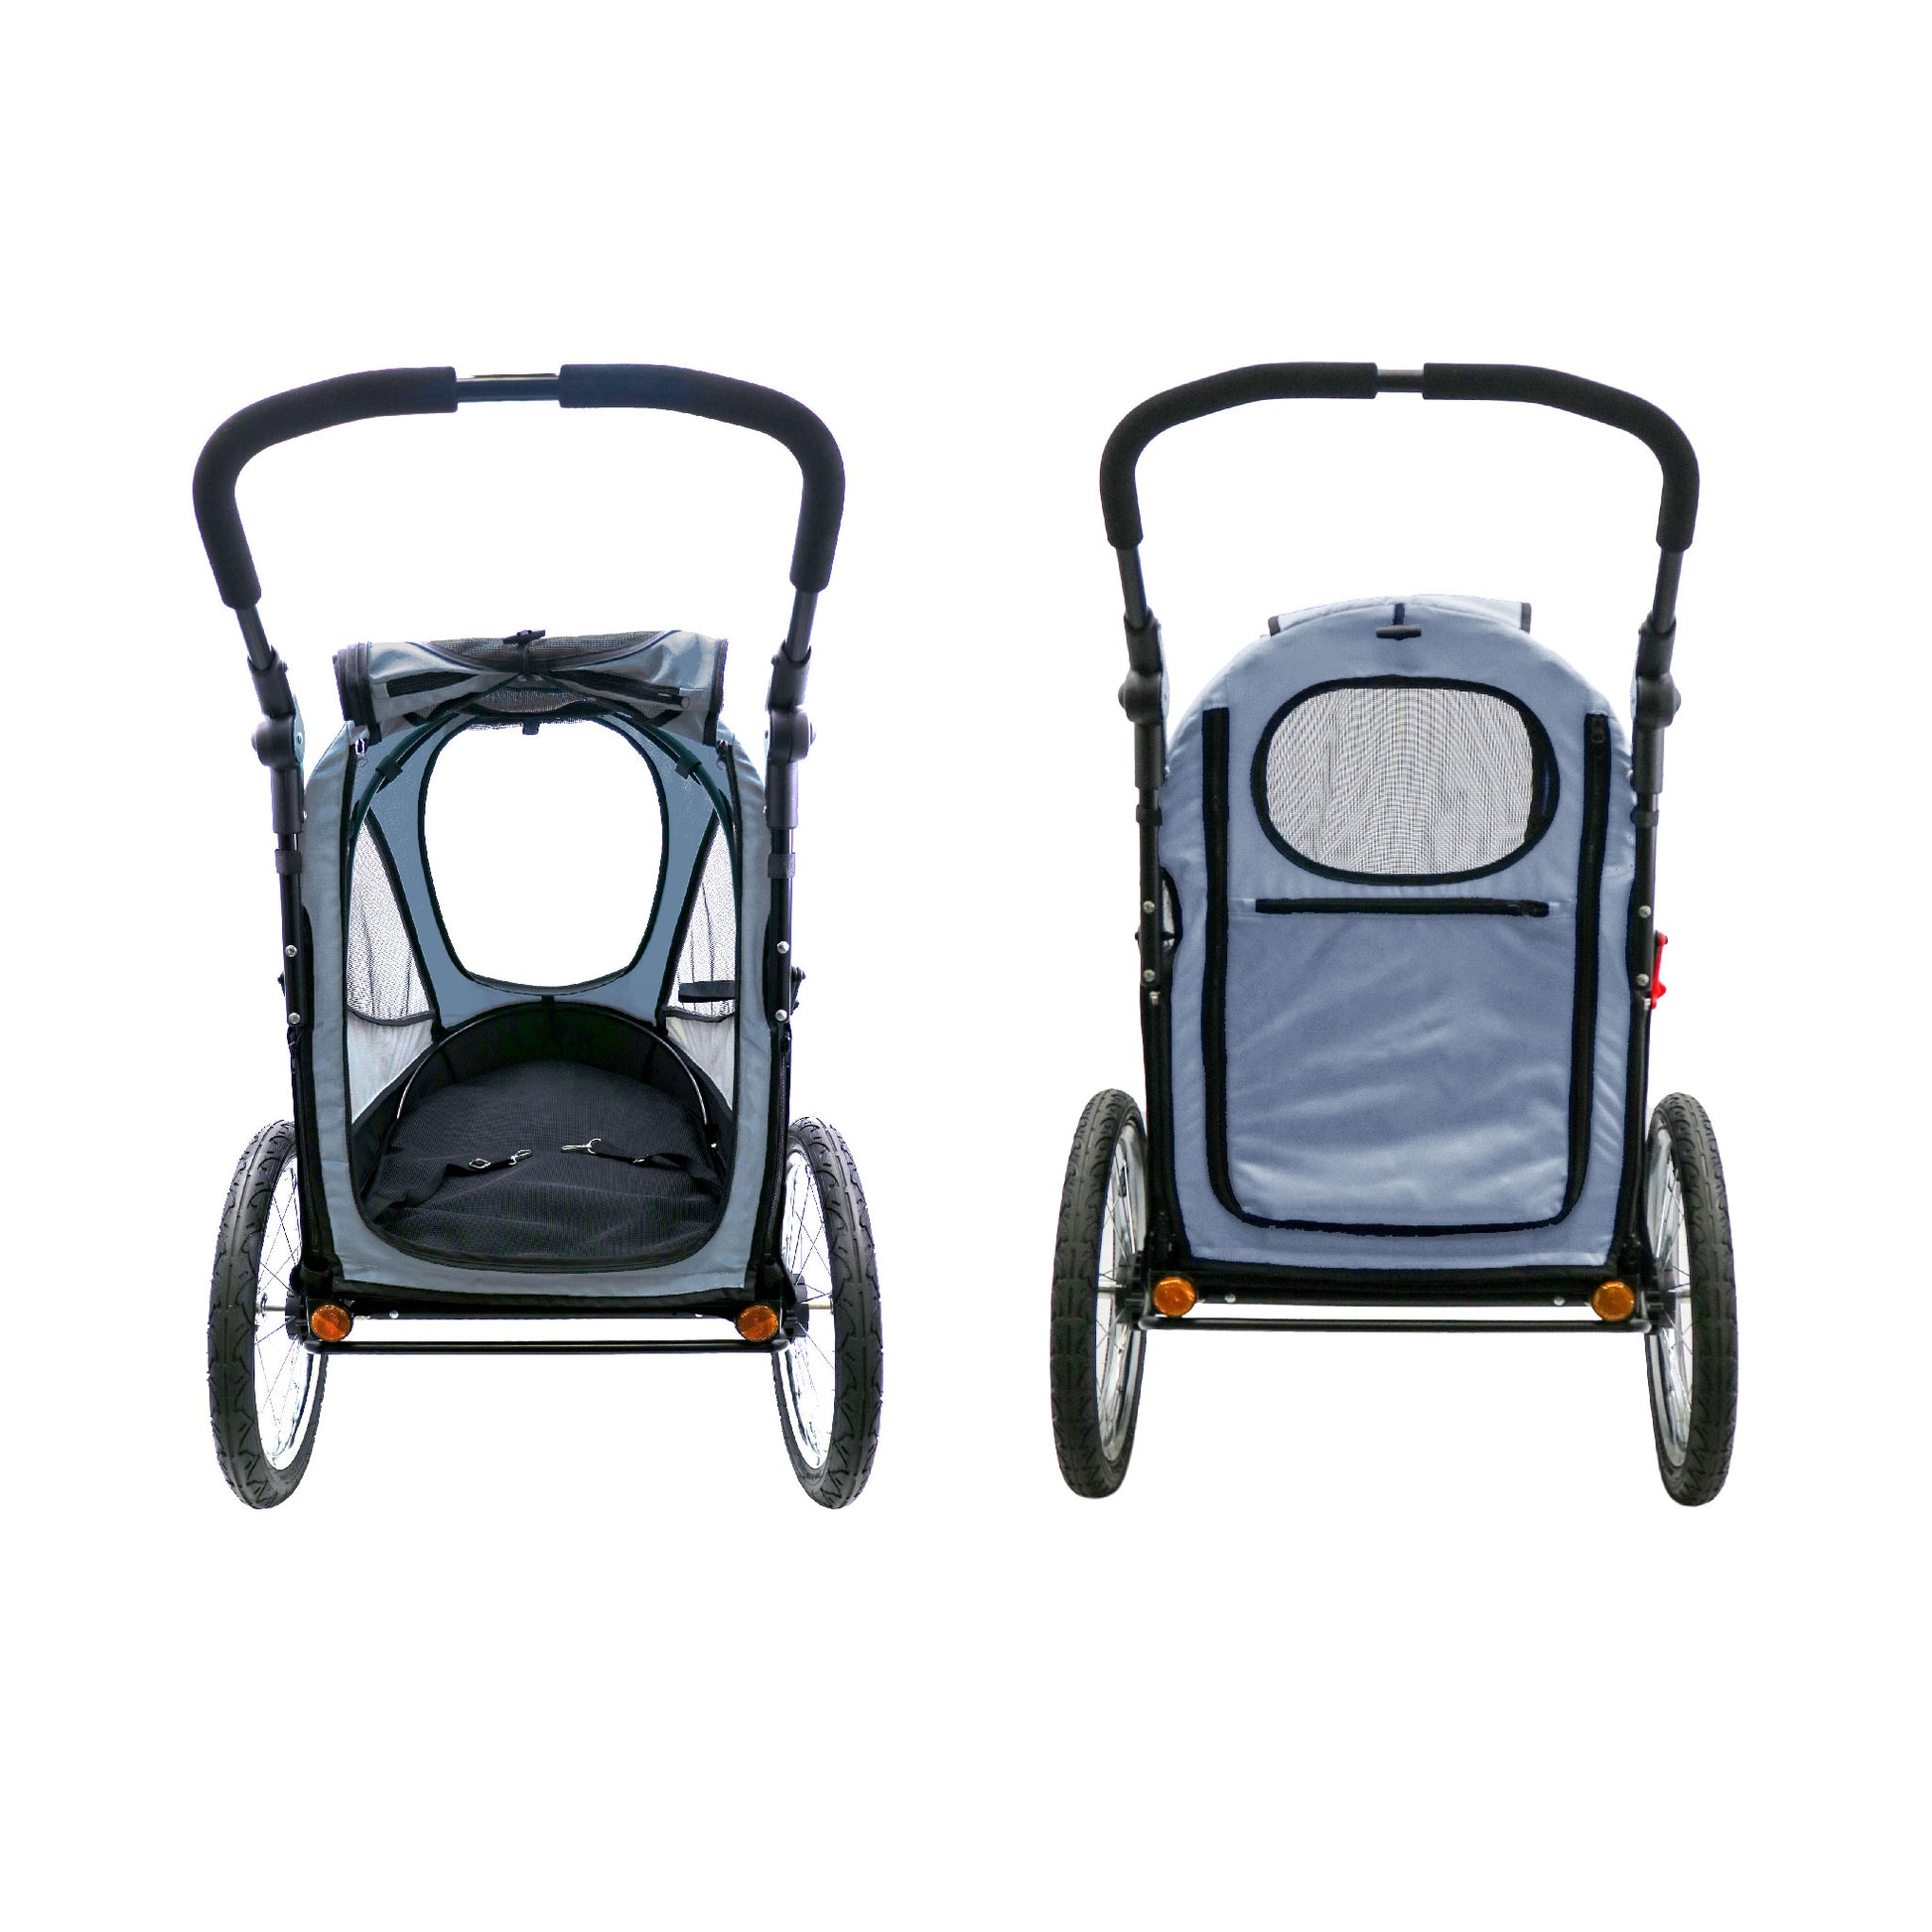 space gray trailblazer pet jogger back entrance open and closed